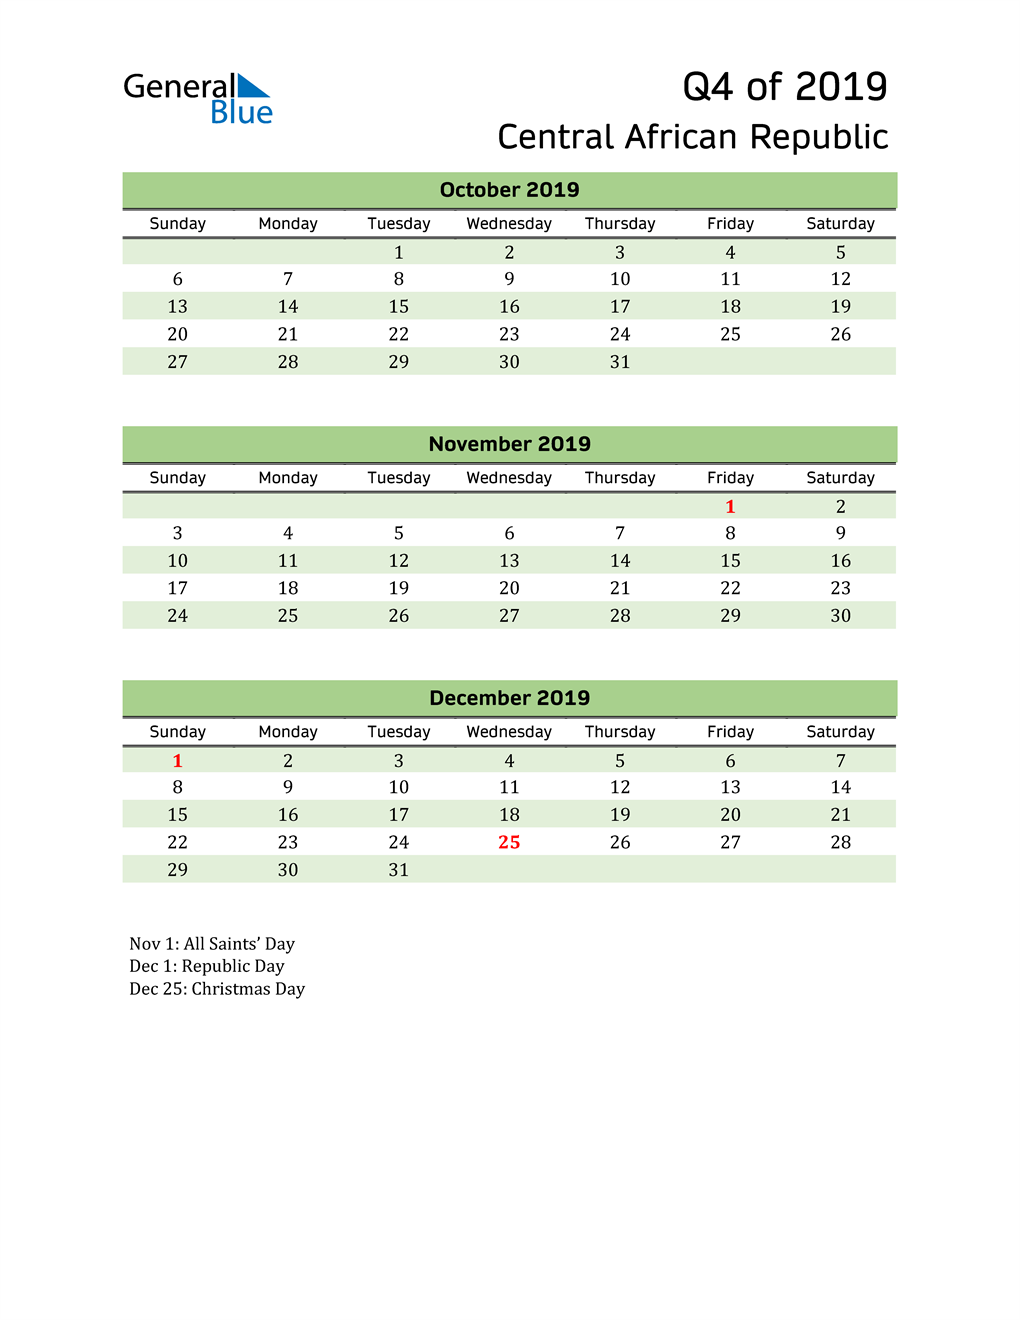  Quarterly Calendar 2019 with Central African Republic Holidays 